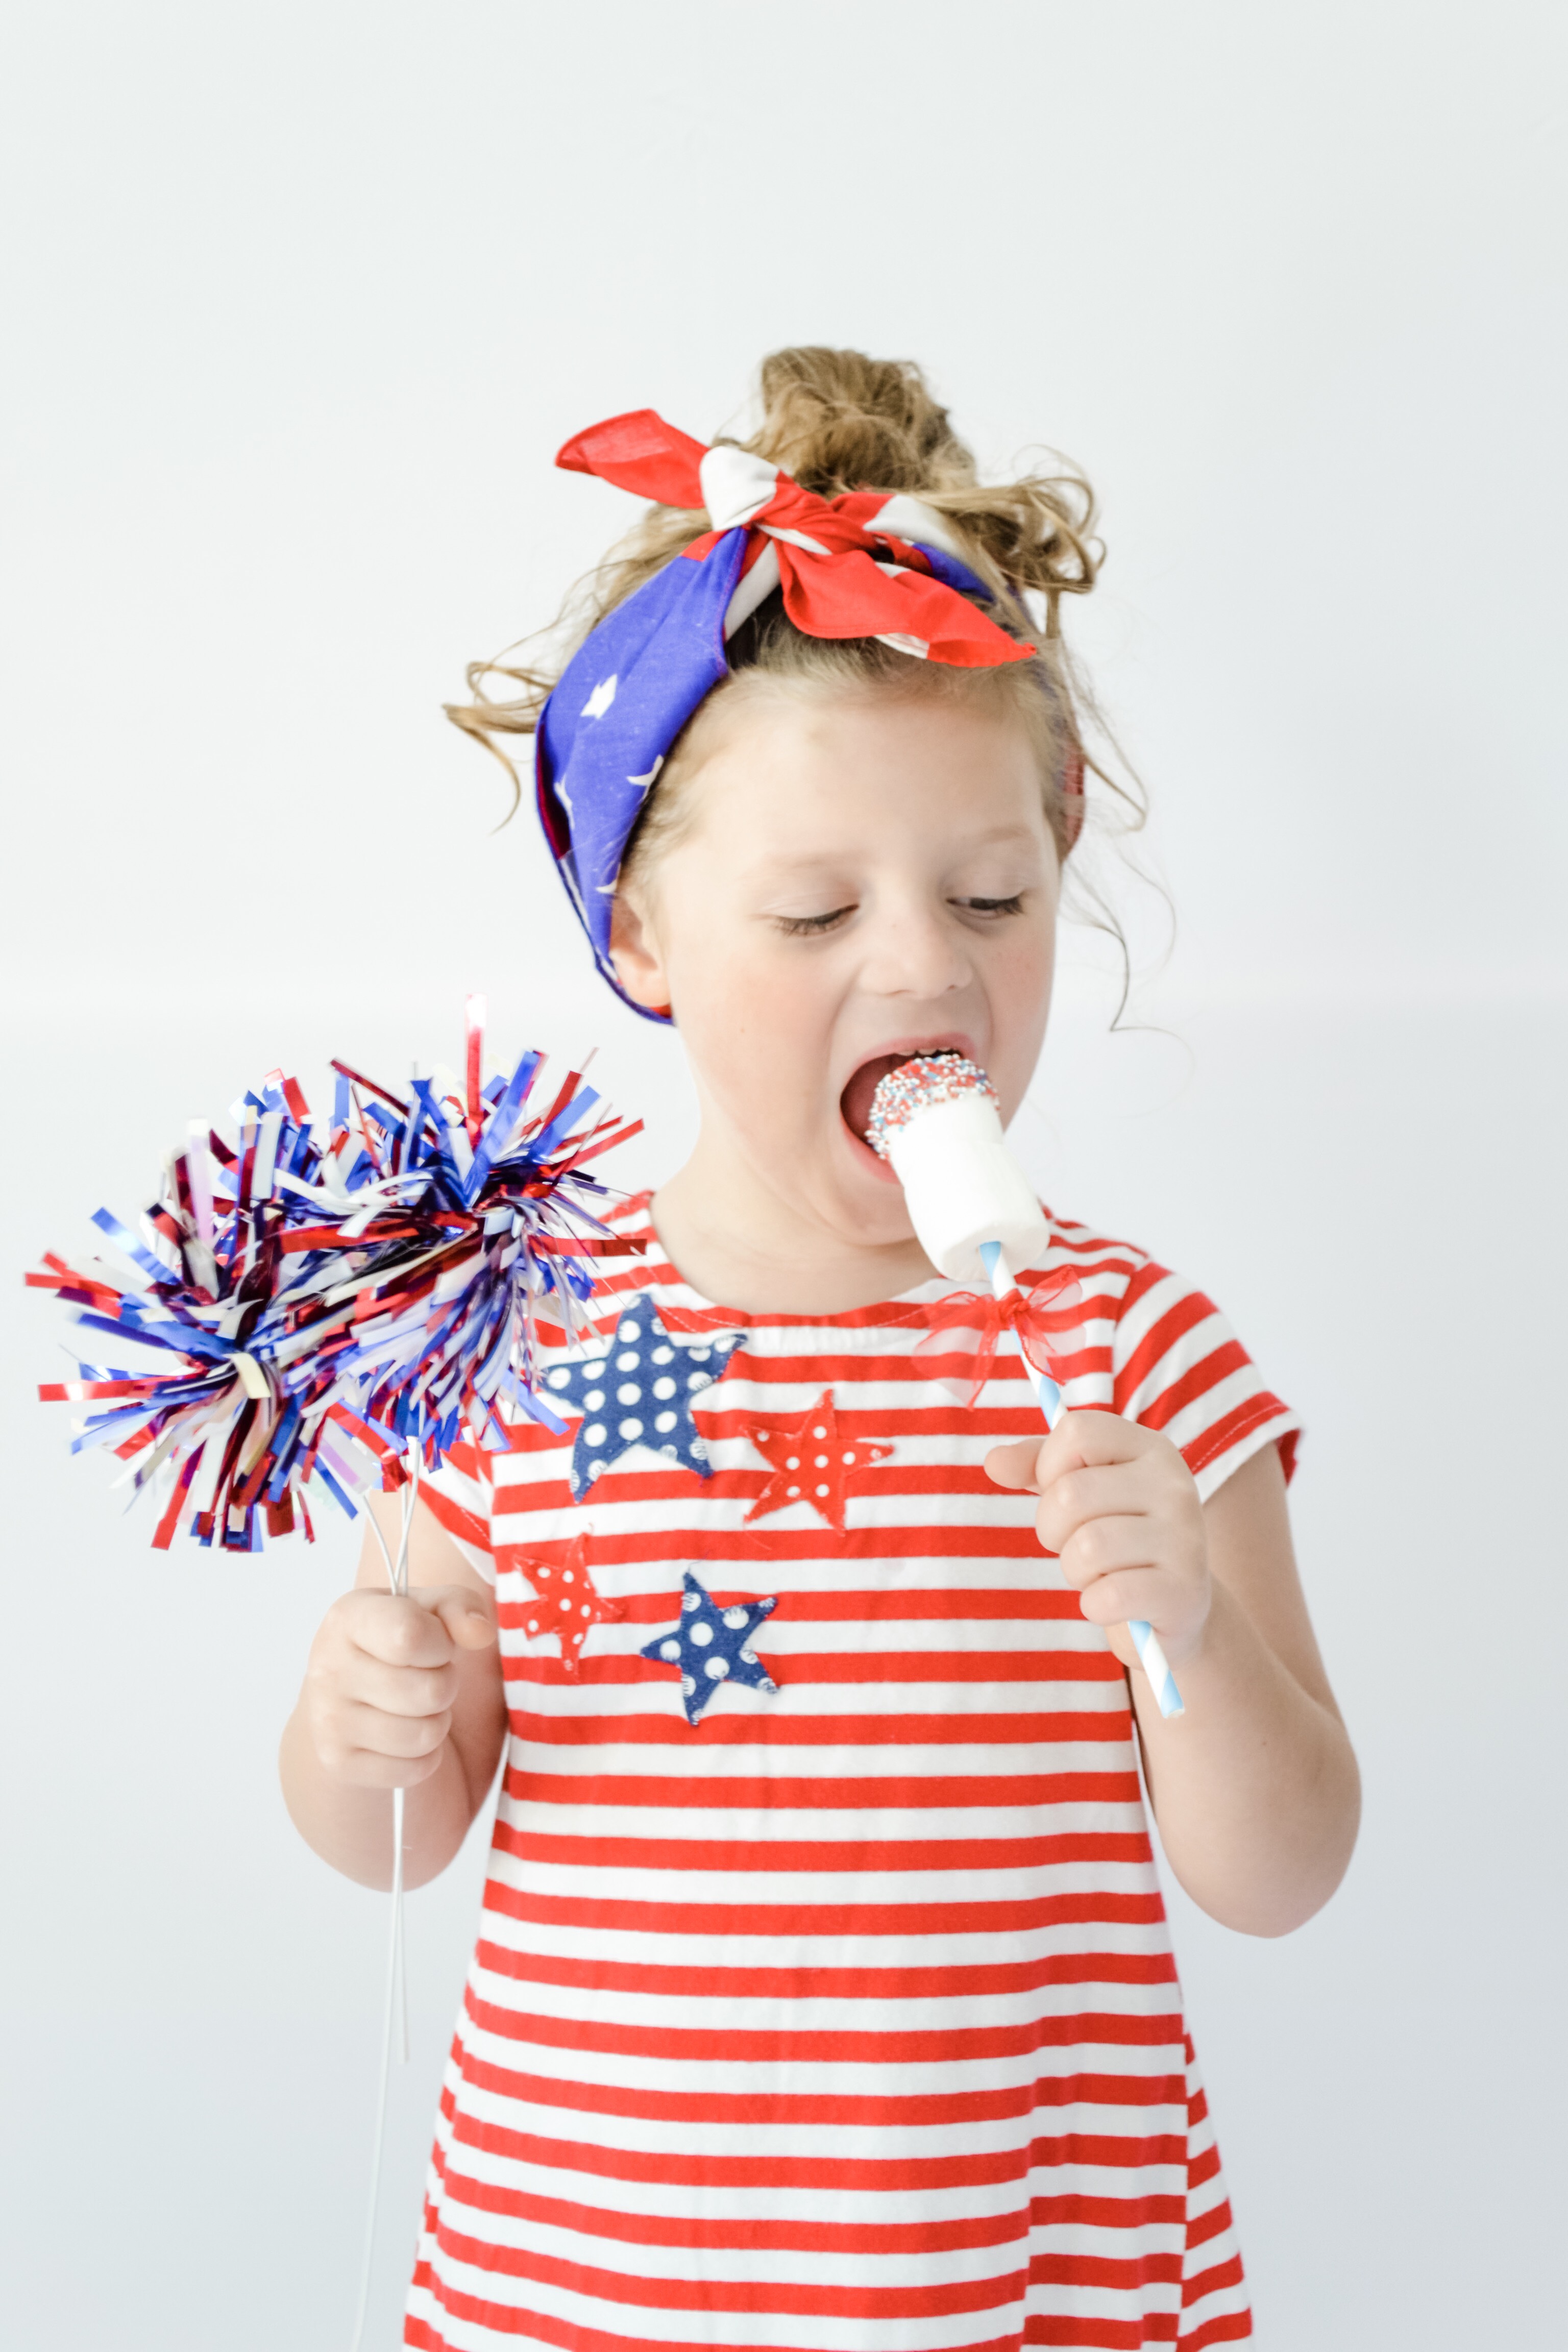 Patriotic Marshmallow Pops are a quick and easy snack idea to make for the 4th of July!